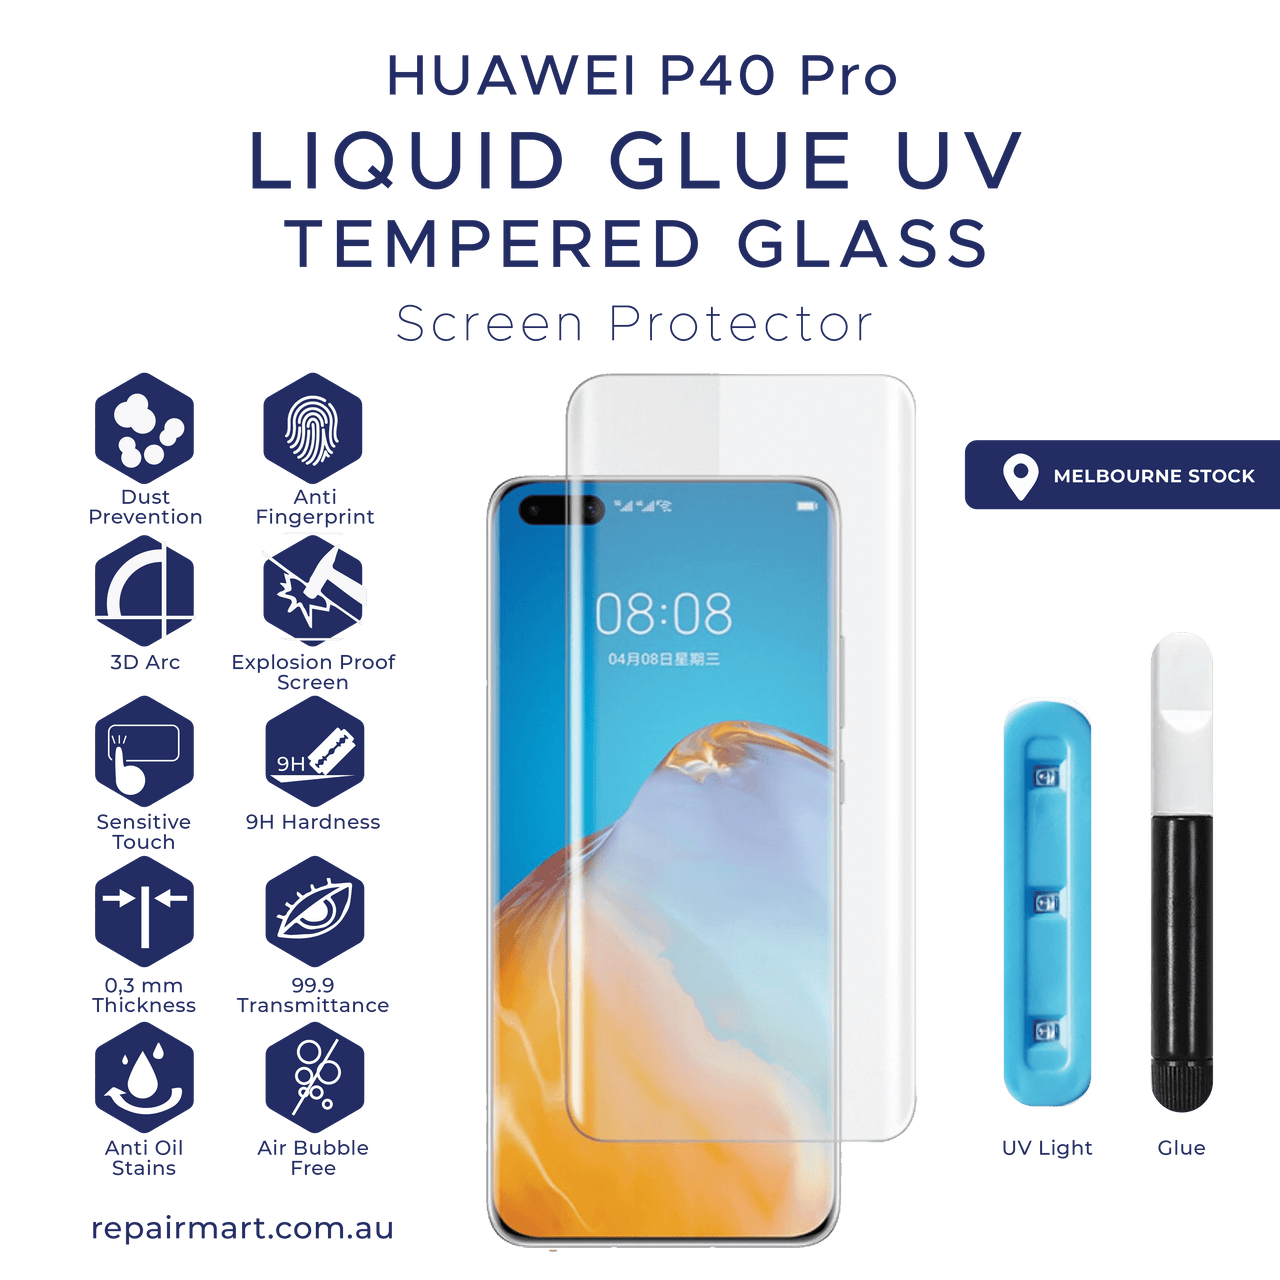 Advanced UV Liquid Glue 9H Tempered Glass Screen Protector for Huawei P50 - Ultimate Guard, Screen Armor, Bubble-Free Installation